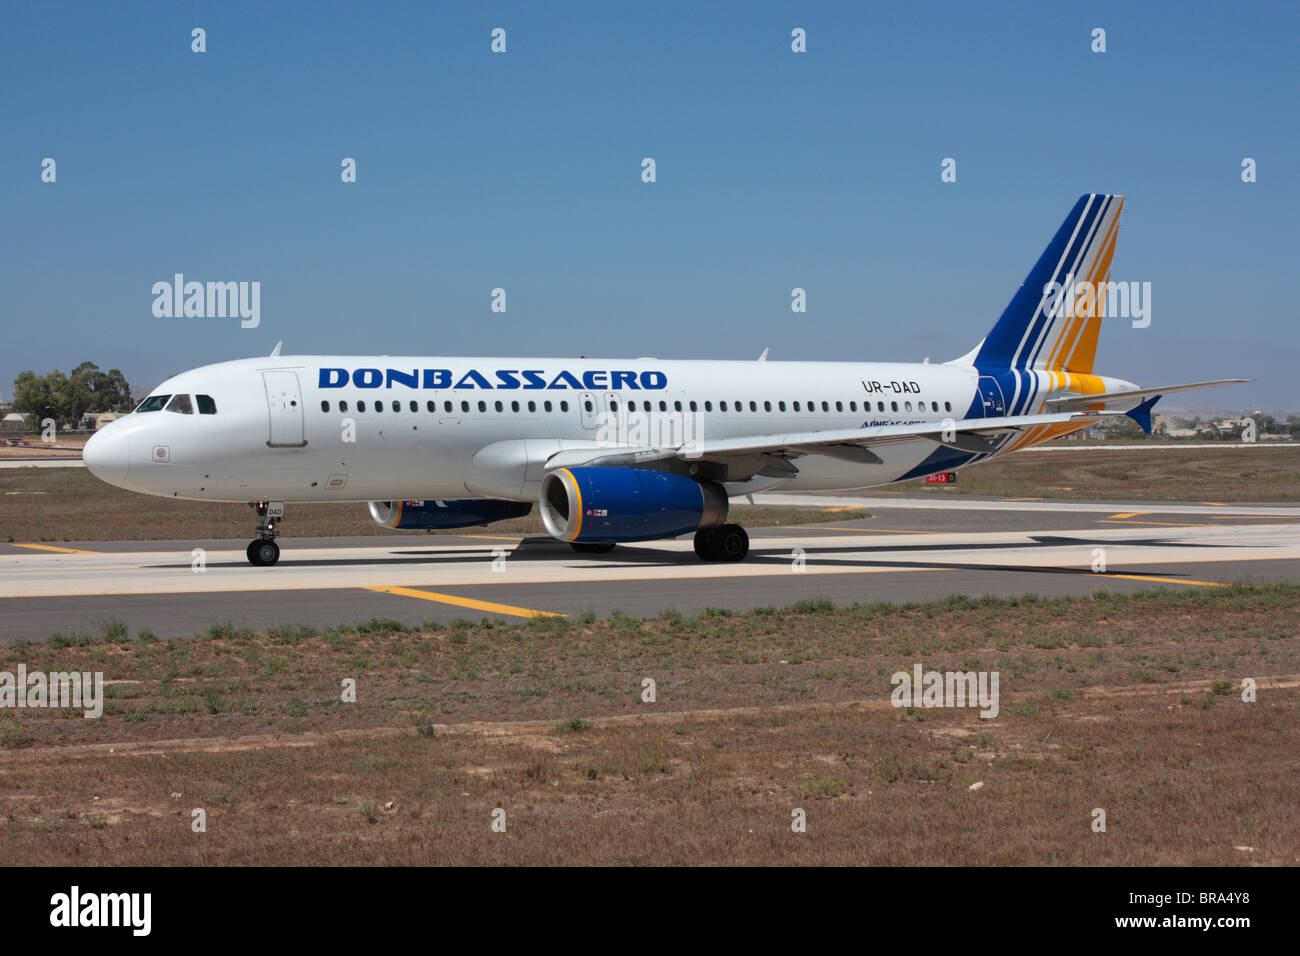 Donbassaero Airbus A320 taxiing for departure Stock Photo